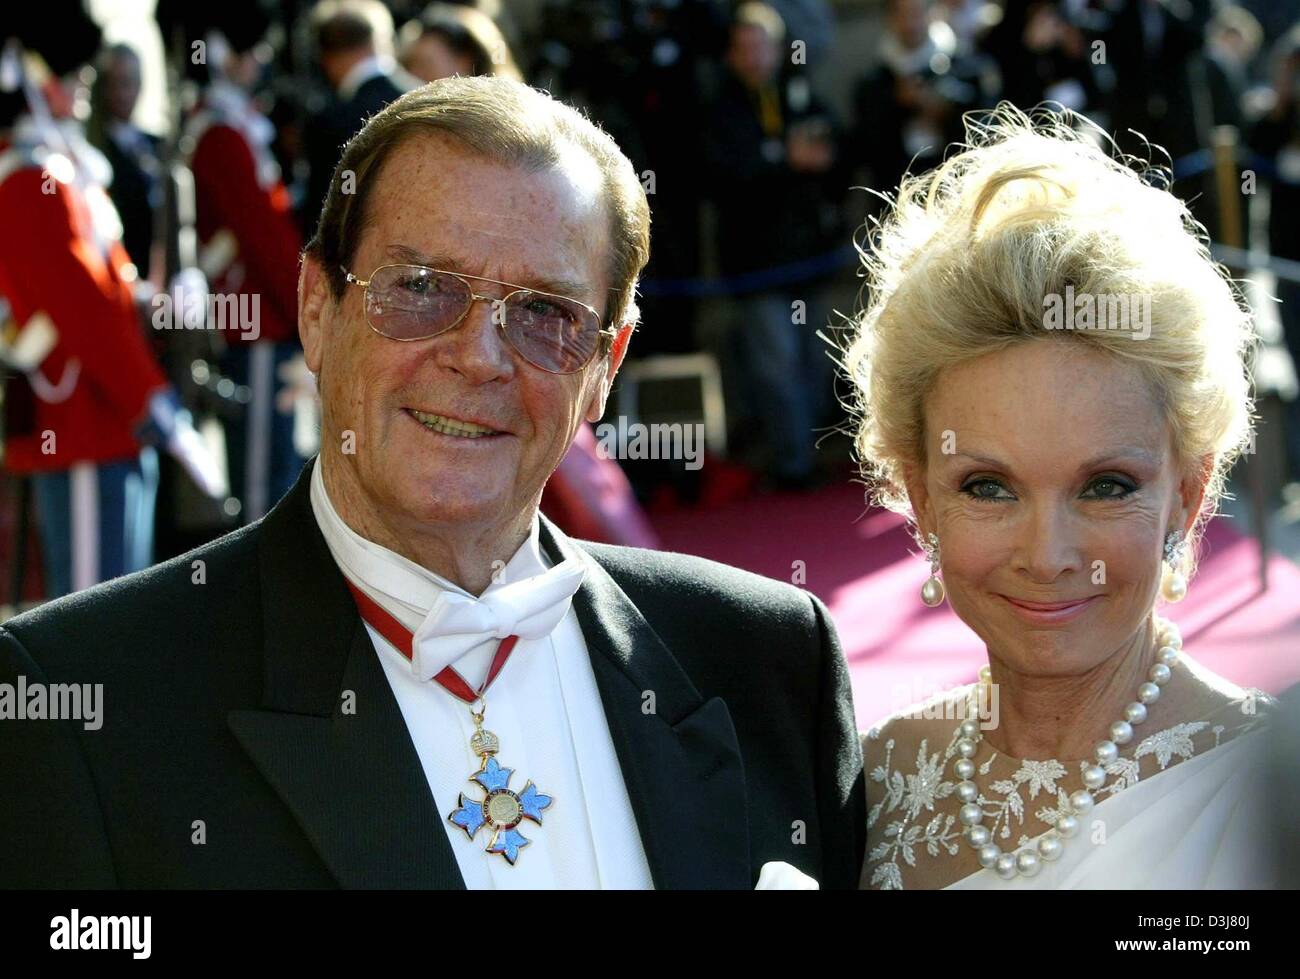 (dpa) - On the eve of the wedding of Crown Prince Frederik of Denmark and Mary Donaldson, British actor Sir Roger Moore and his wife Lady Kristian Moore arrive for a gala at the Royal Theatre in Copenhagen, Denmark, 13 May 2004. Stock Photo